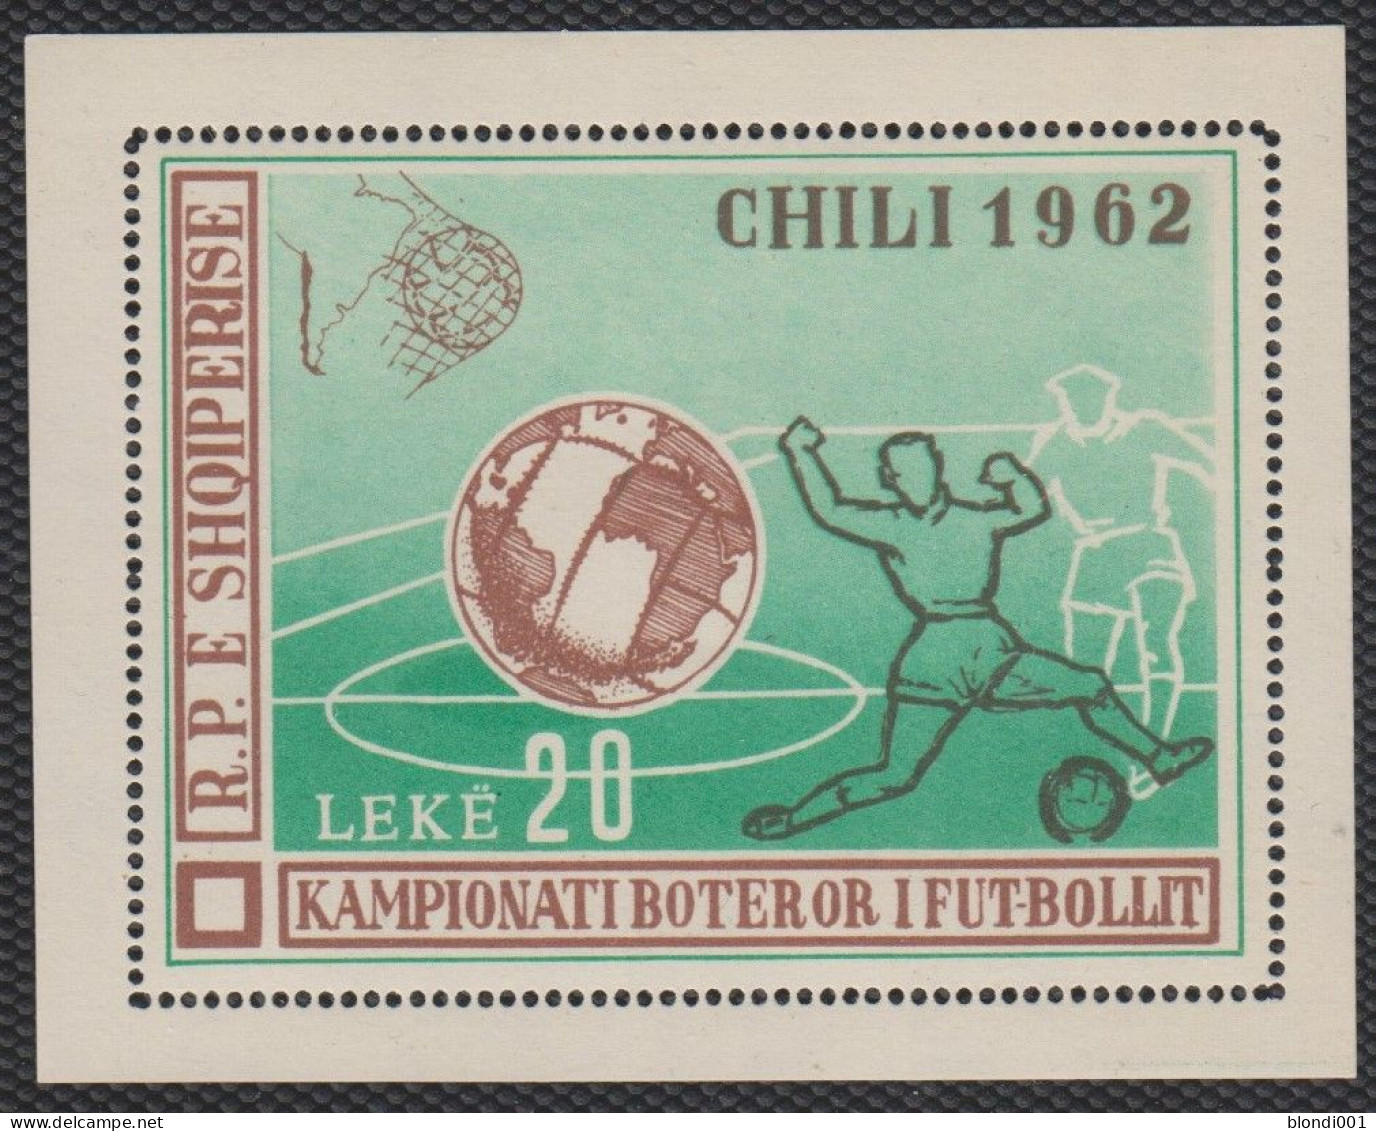 Soccer World Cup 1962 - Football - ALBANIA - S/S Perf. MNH - 1962 – Cile